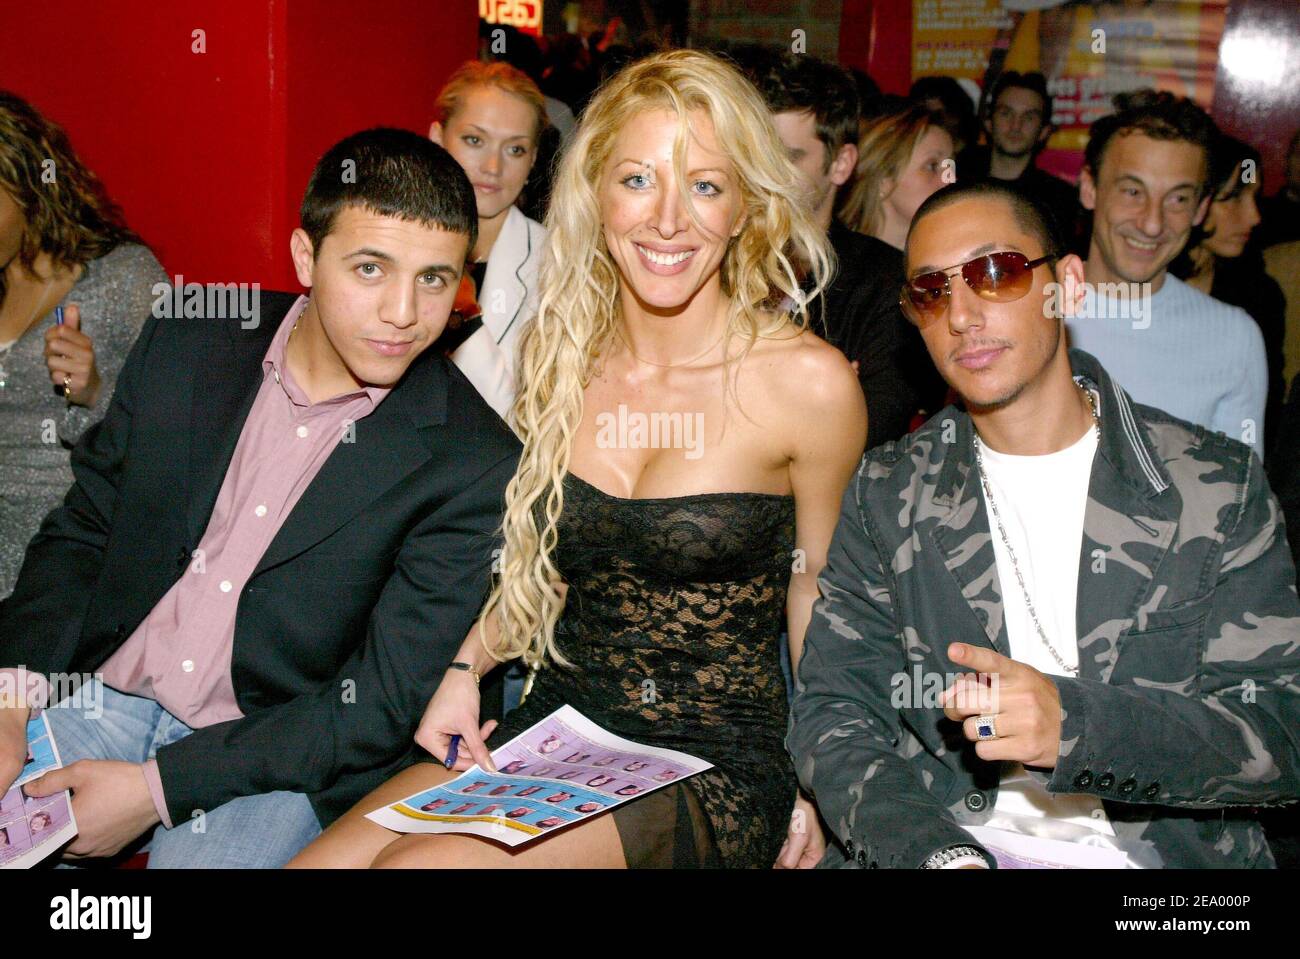 (L-R) Rai singer Faudel, former reality TV participant Loana ('Loft') and singer K-Maro during the party for the 'Top Model France' final elections held at Les Salons du Louvre in Paris, France, on February 3, 2005. Photo by Edouard Bernaux/ABACA. Stock Photo